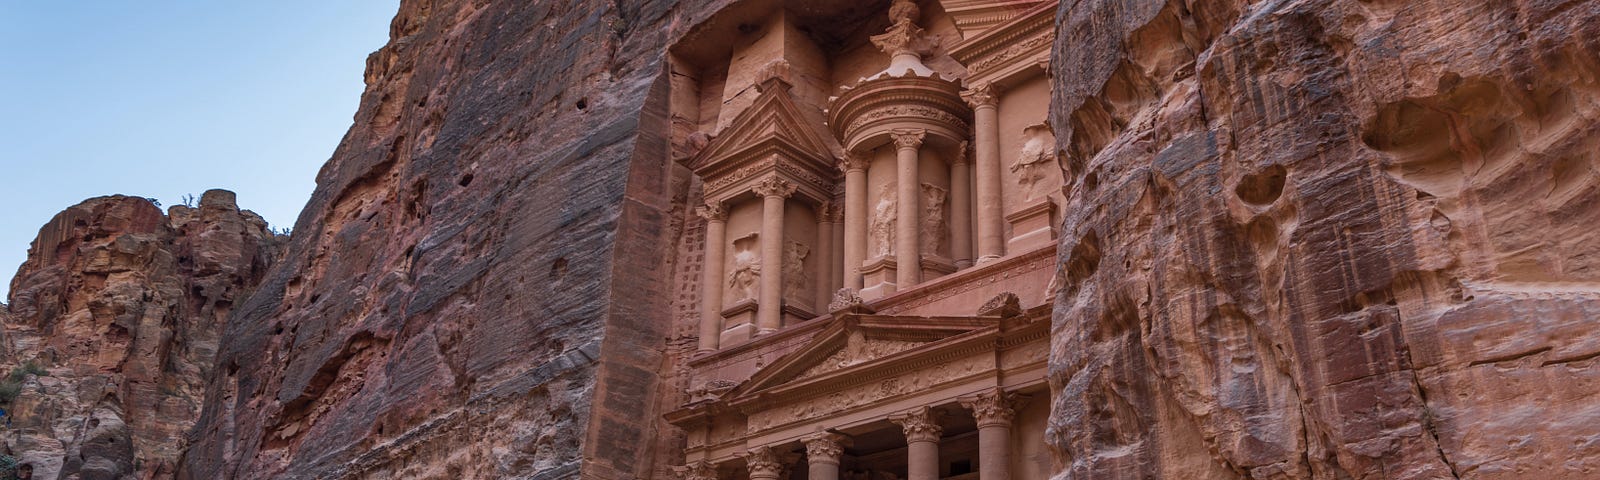 Horse and carts in front of Al Khazneh temple at Petra in Jordan